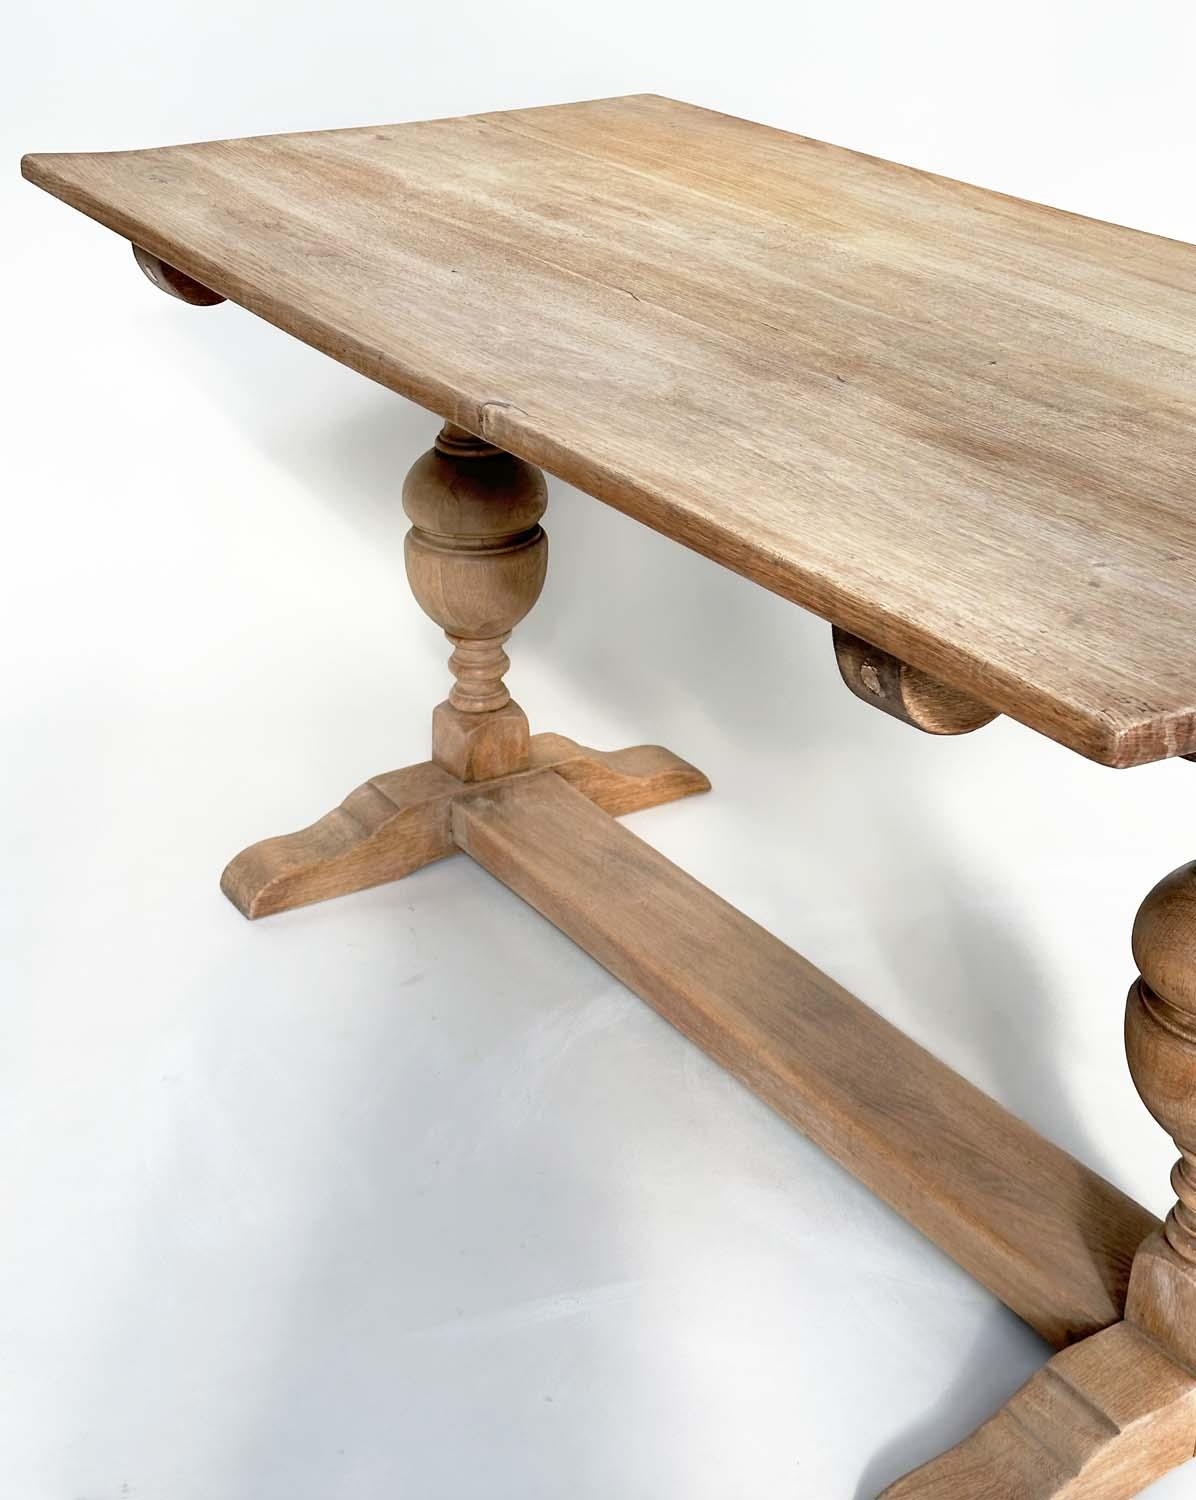 REFECTORY TABLE, early English style oak with planked top, cup and cover turned pillar trestles - Image 5 of 12